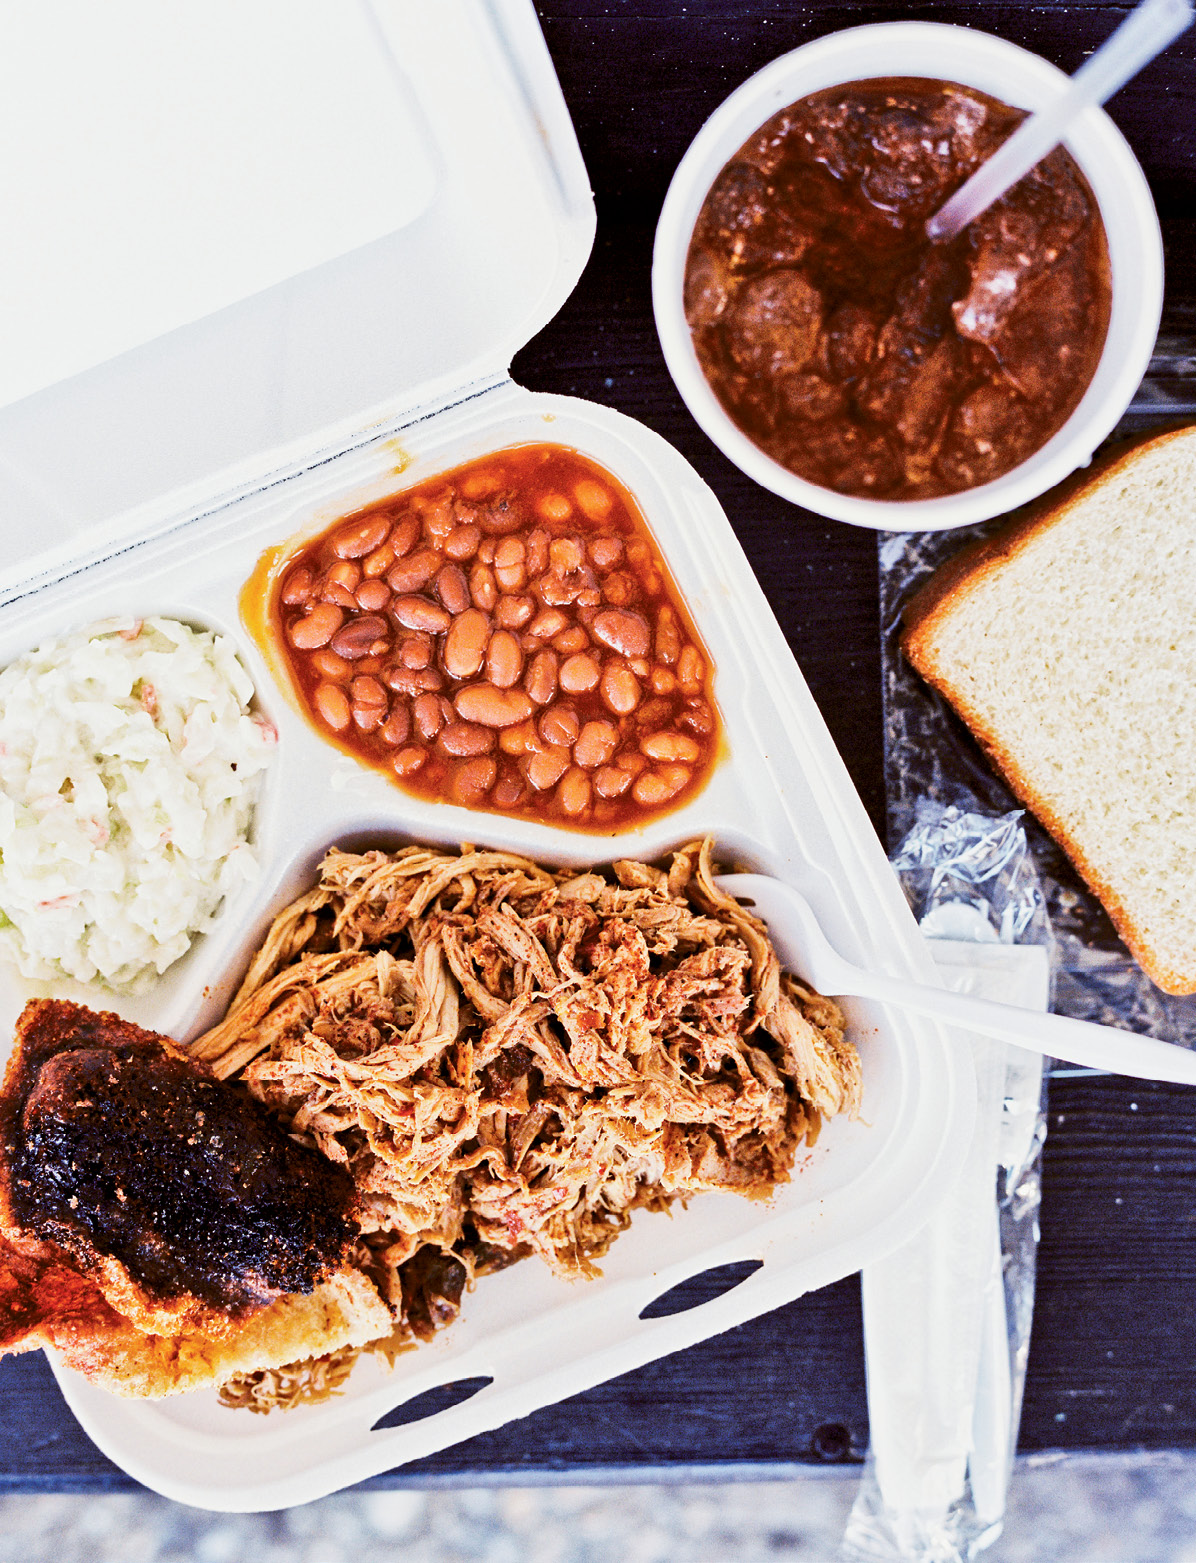 Pulled pork, chicken, and sides from Scott’s Bar-B-Que, Rodney Scott’s family’s place in Hemingway